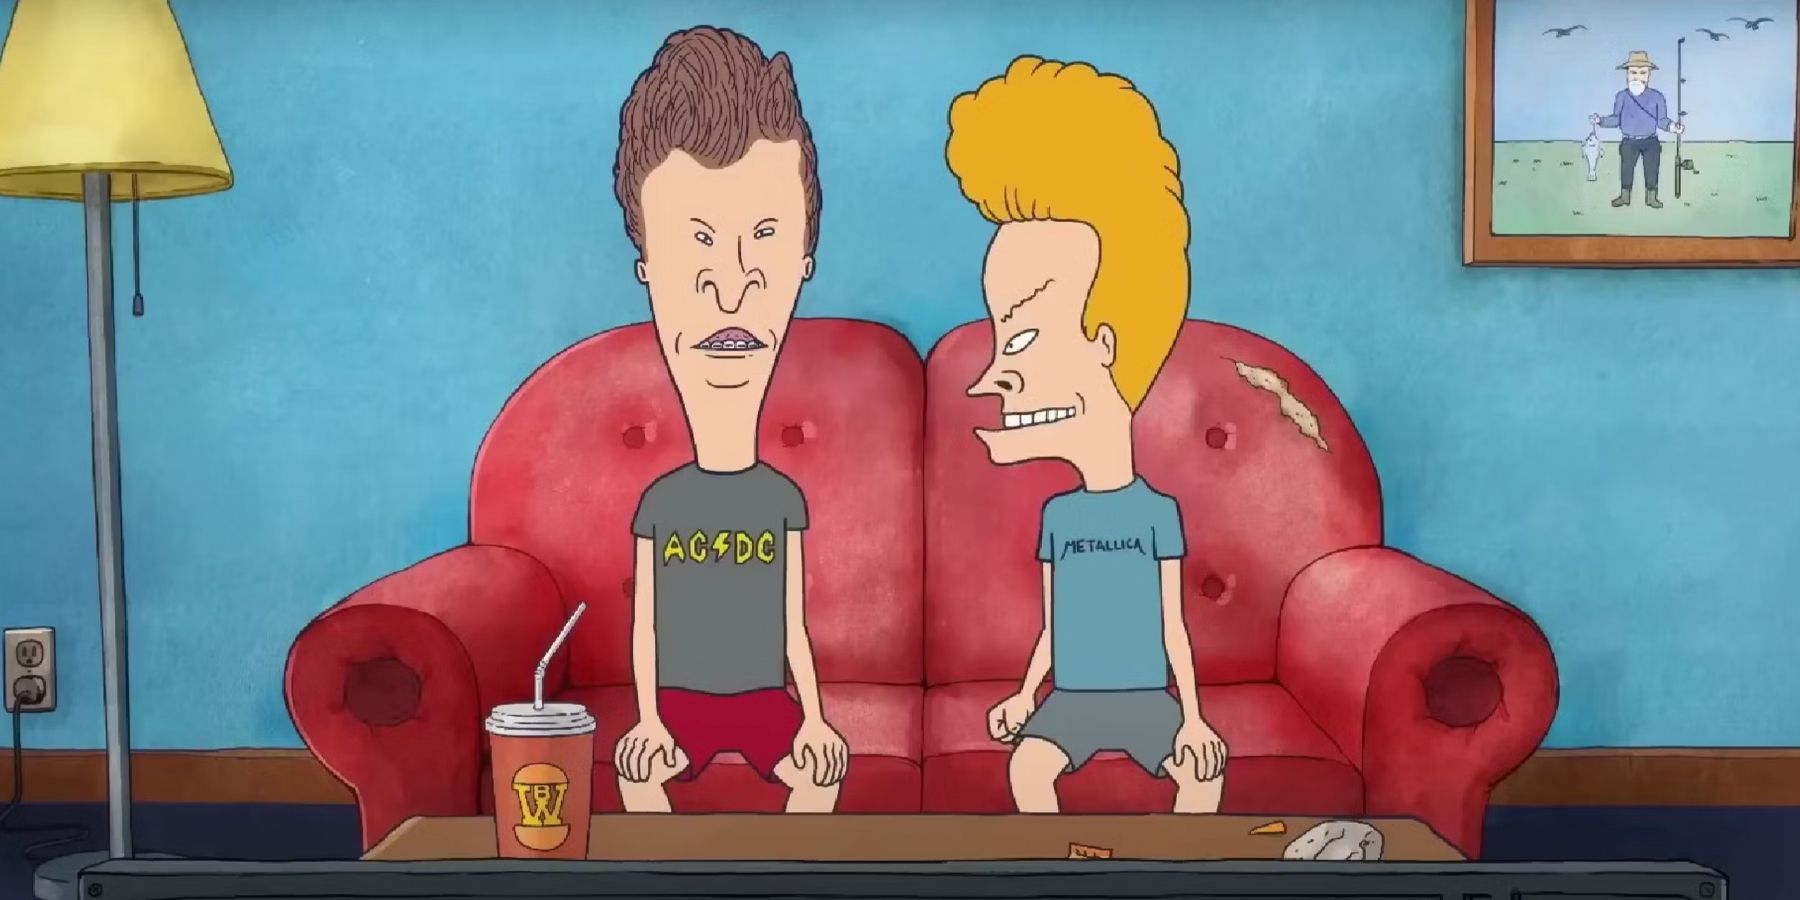 download new beavis and buttheads 2022 release schedule